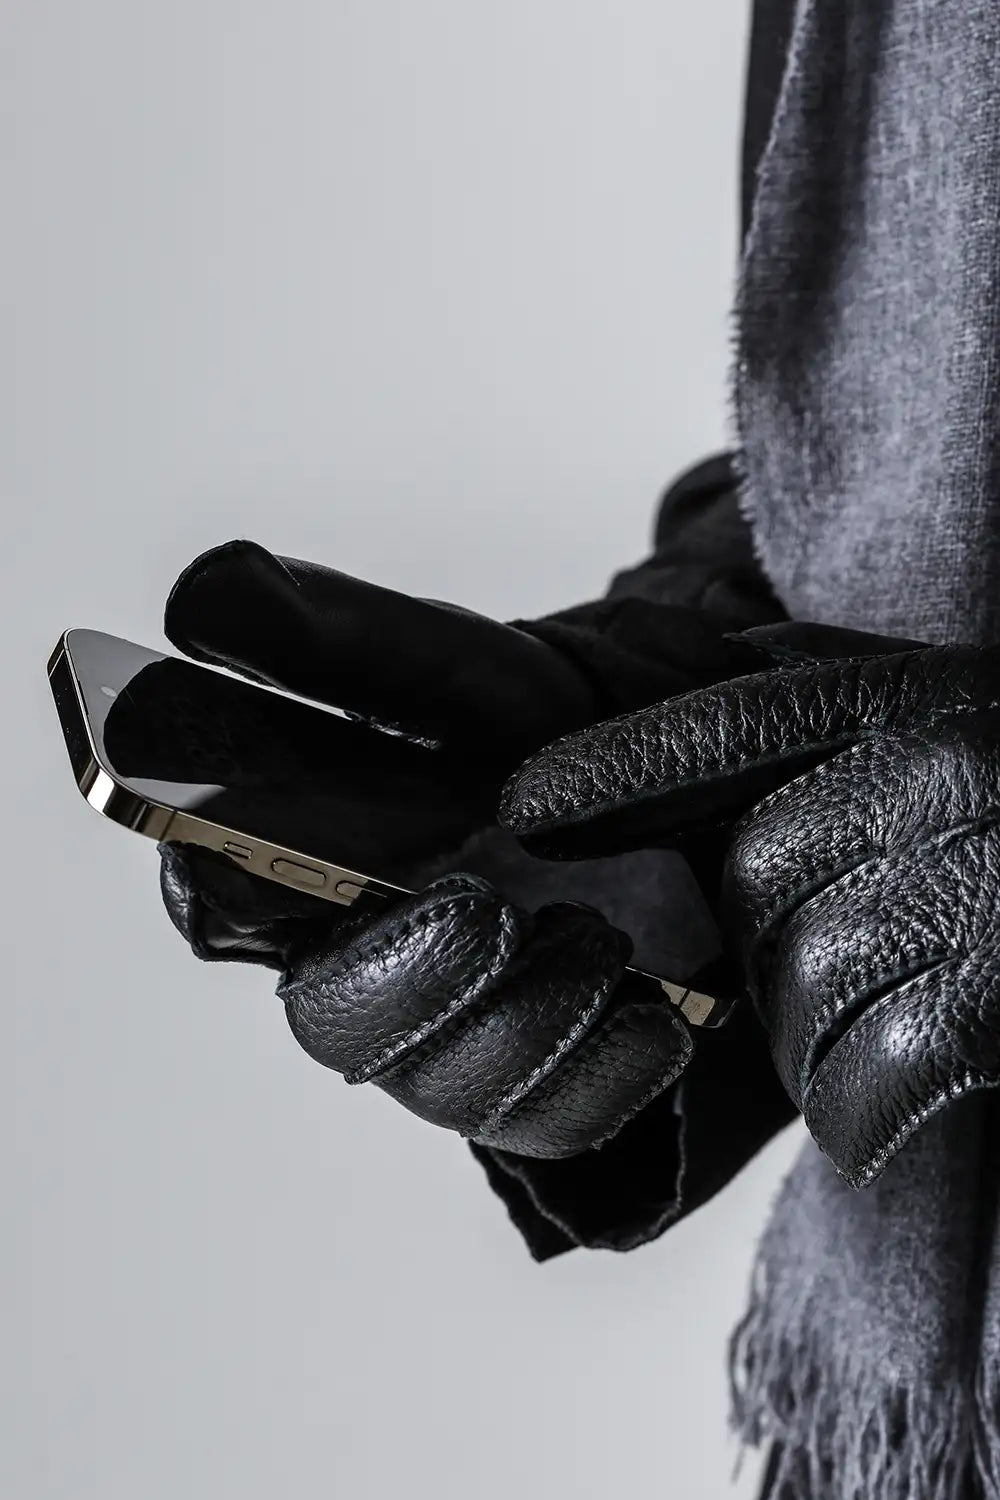 DENTS 23-24AW - Oxburgh Sccottish Cashmare Touch Screen Leather Glove - 15-1158-black Oxburgh Sccottish Cashmare Touch Screen Leather Glove Black 1-002